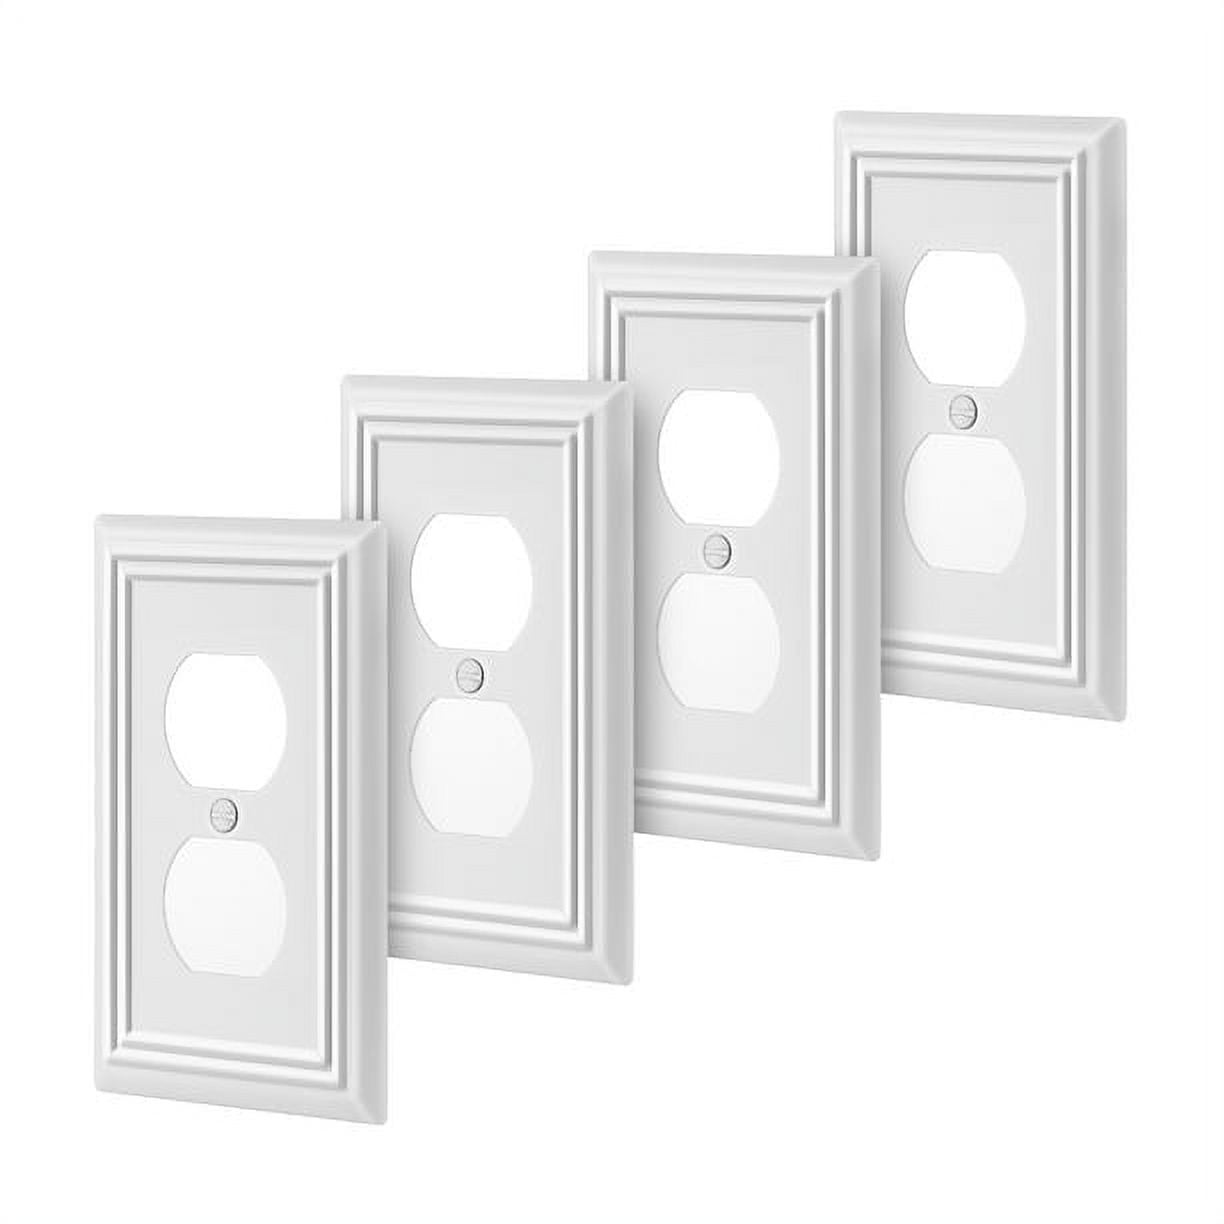 DEWENWILS 4-Pack Duplex Wallplates, Metal Receptacle Gfci Outlet Cover with  White Finish, for home Electrical Outlets